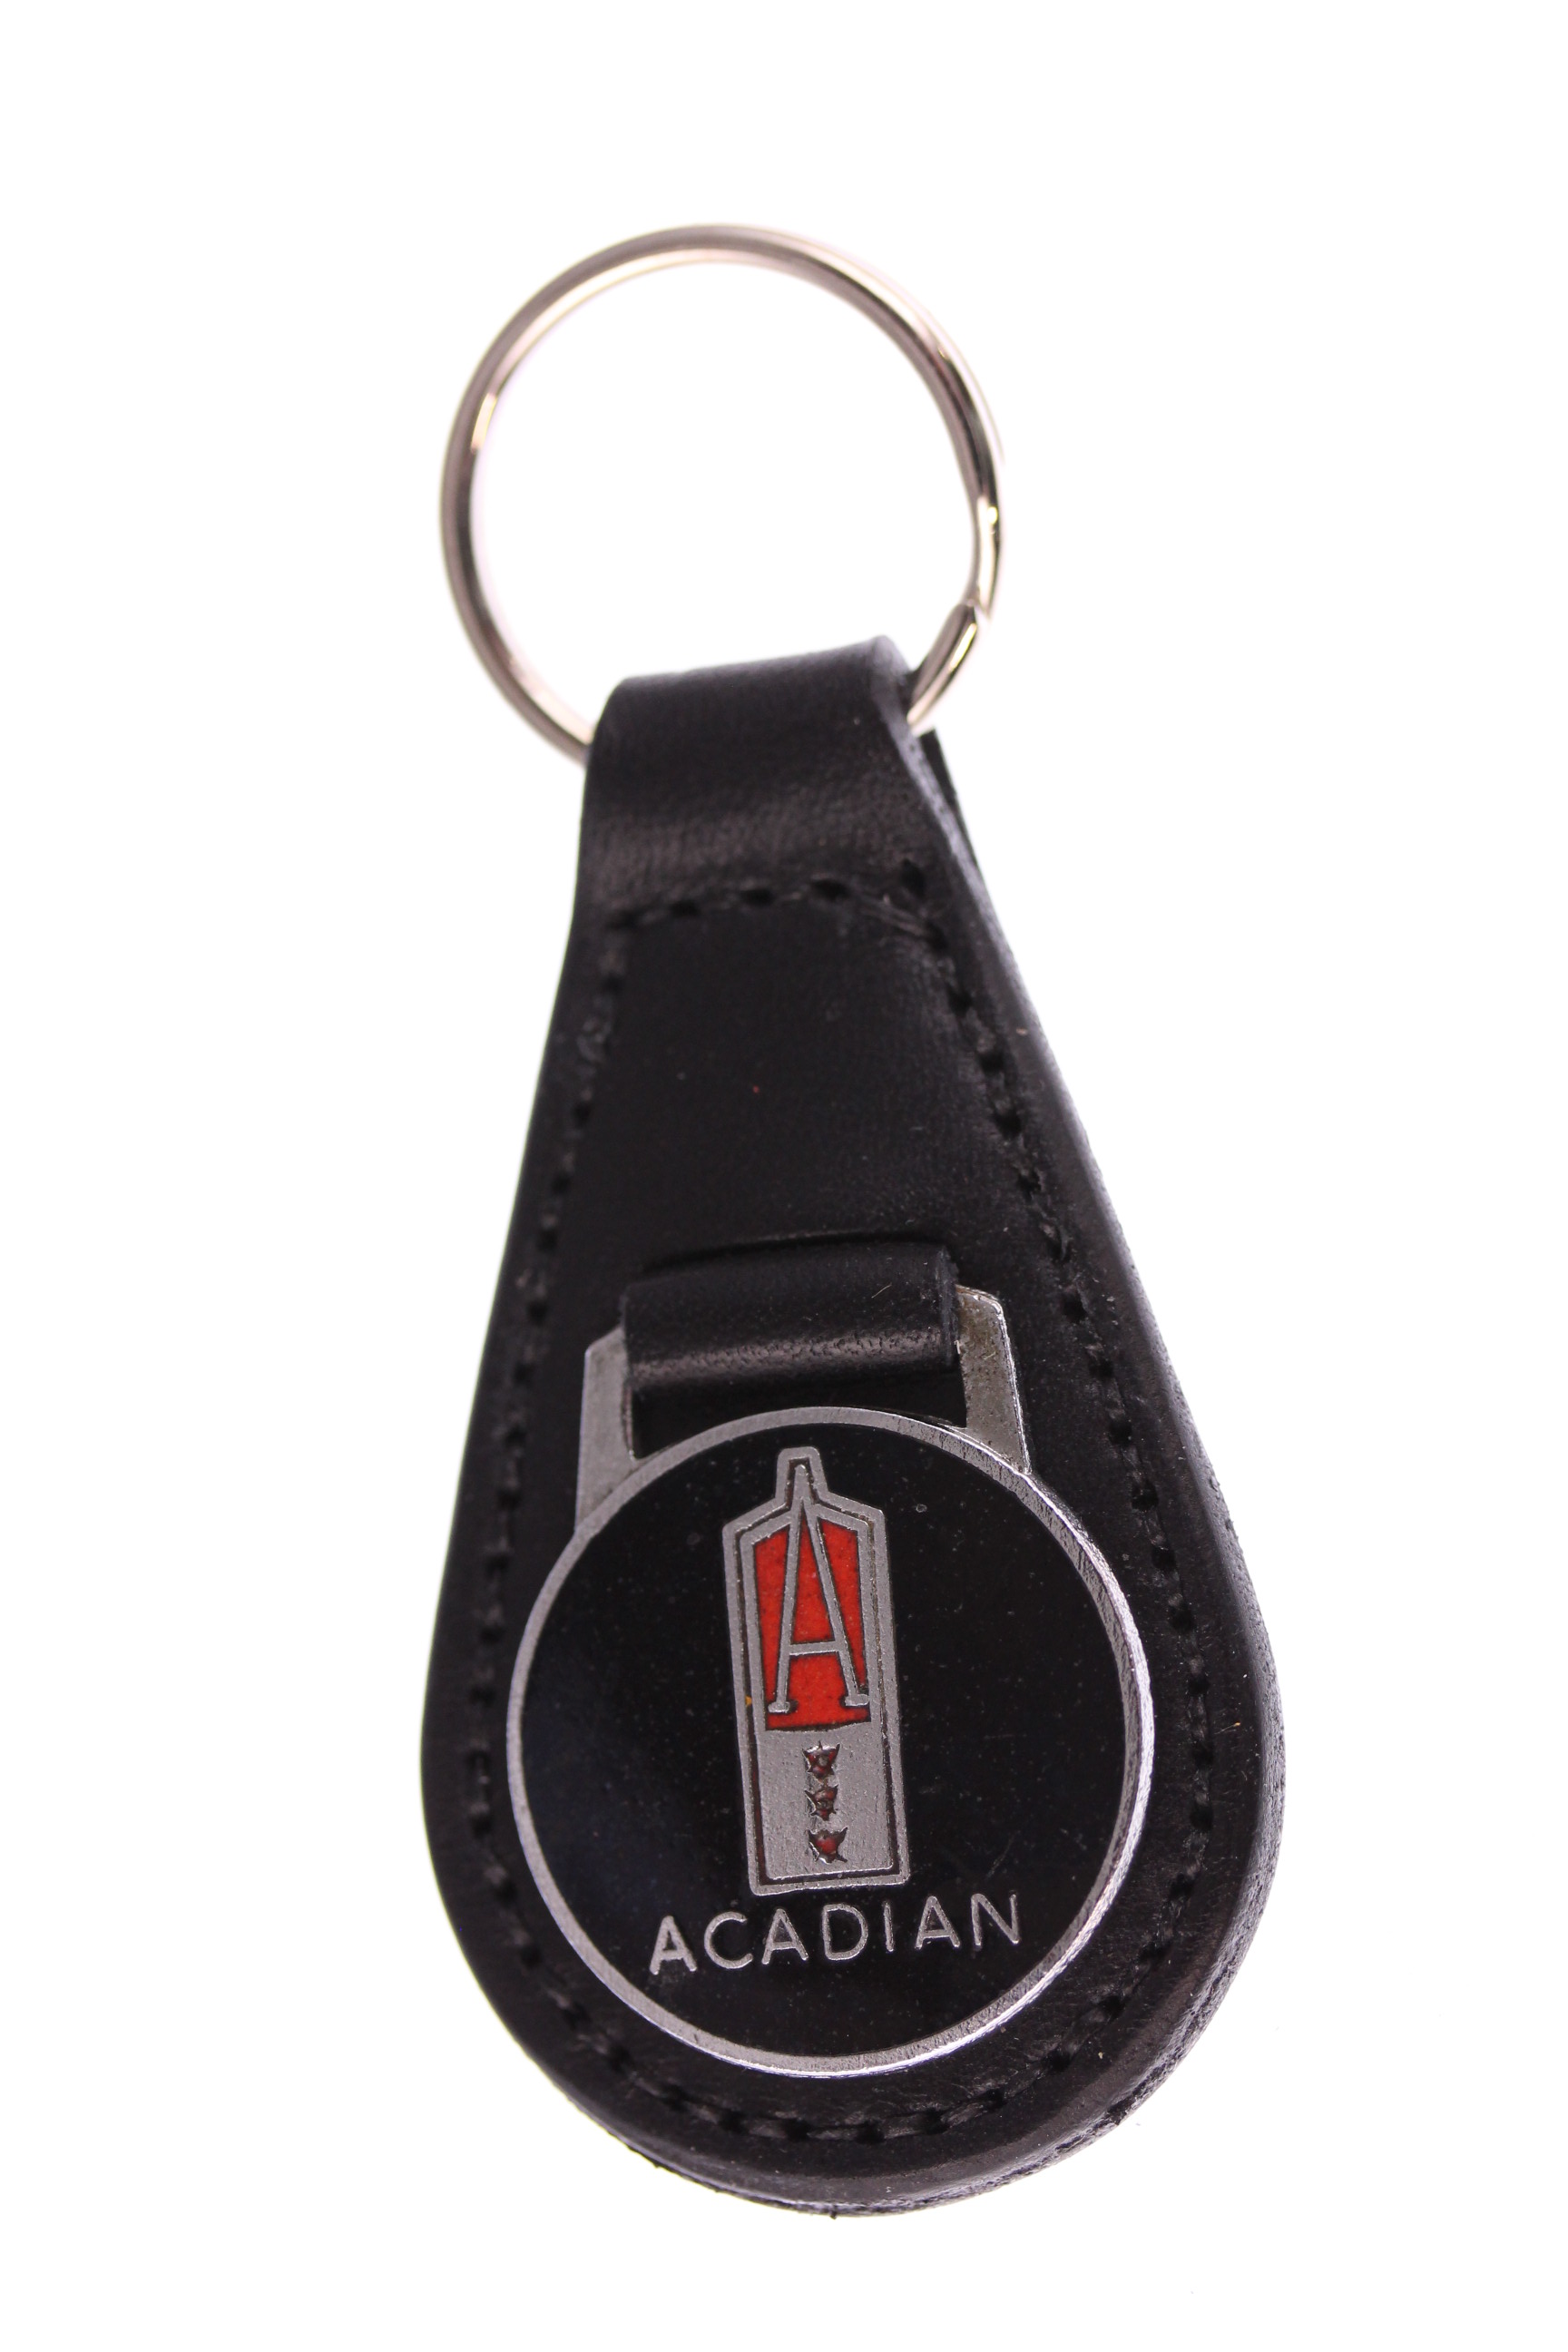 NOW SOLD -Acadian - original old stock late 1960's badge keyring